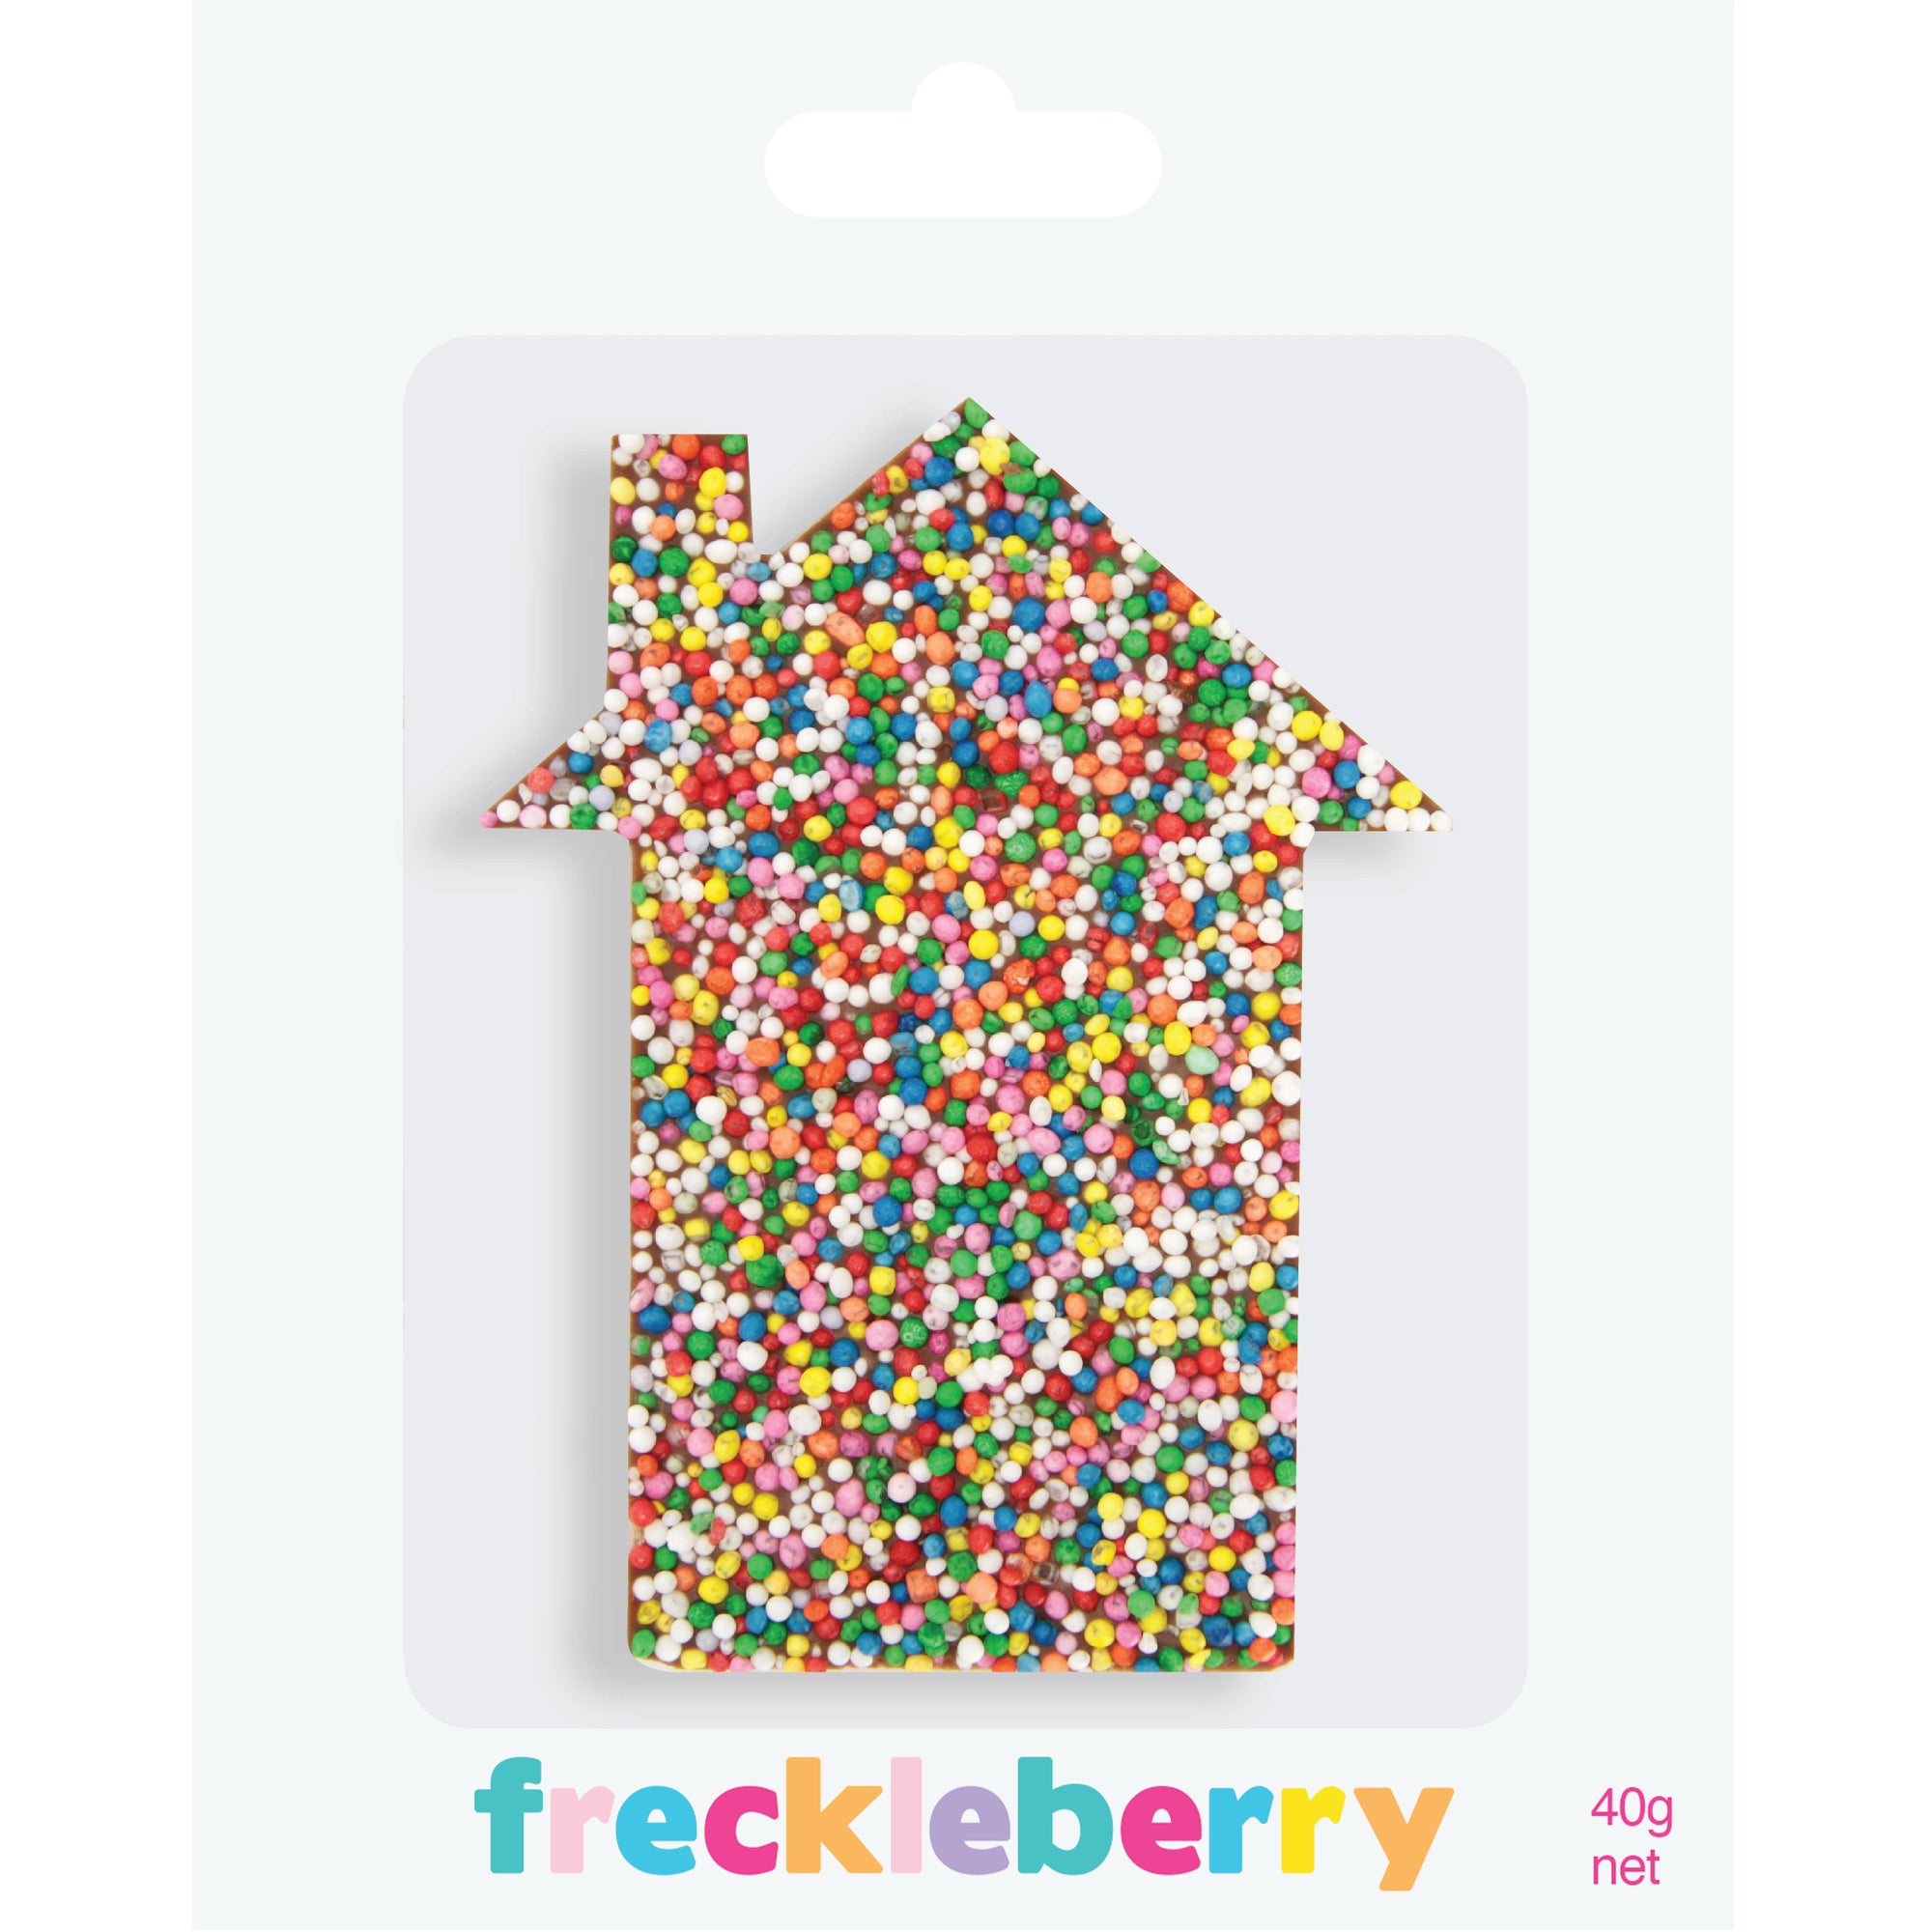 Freckleberry - Freckle House